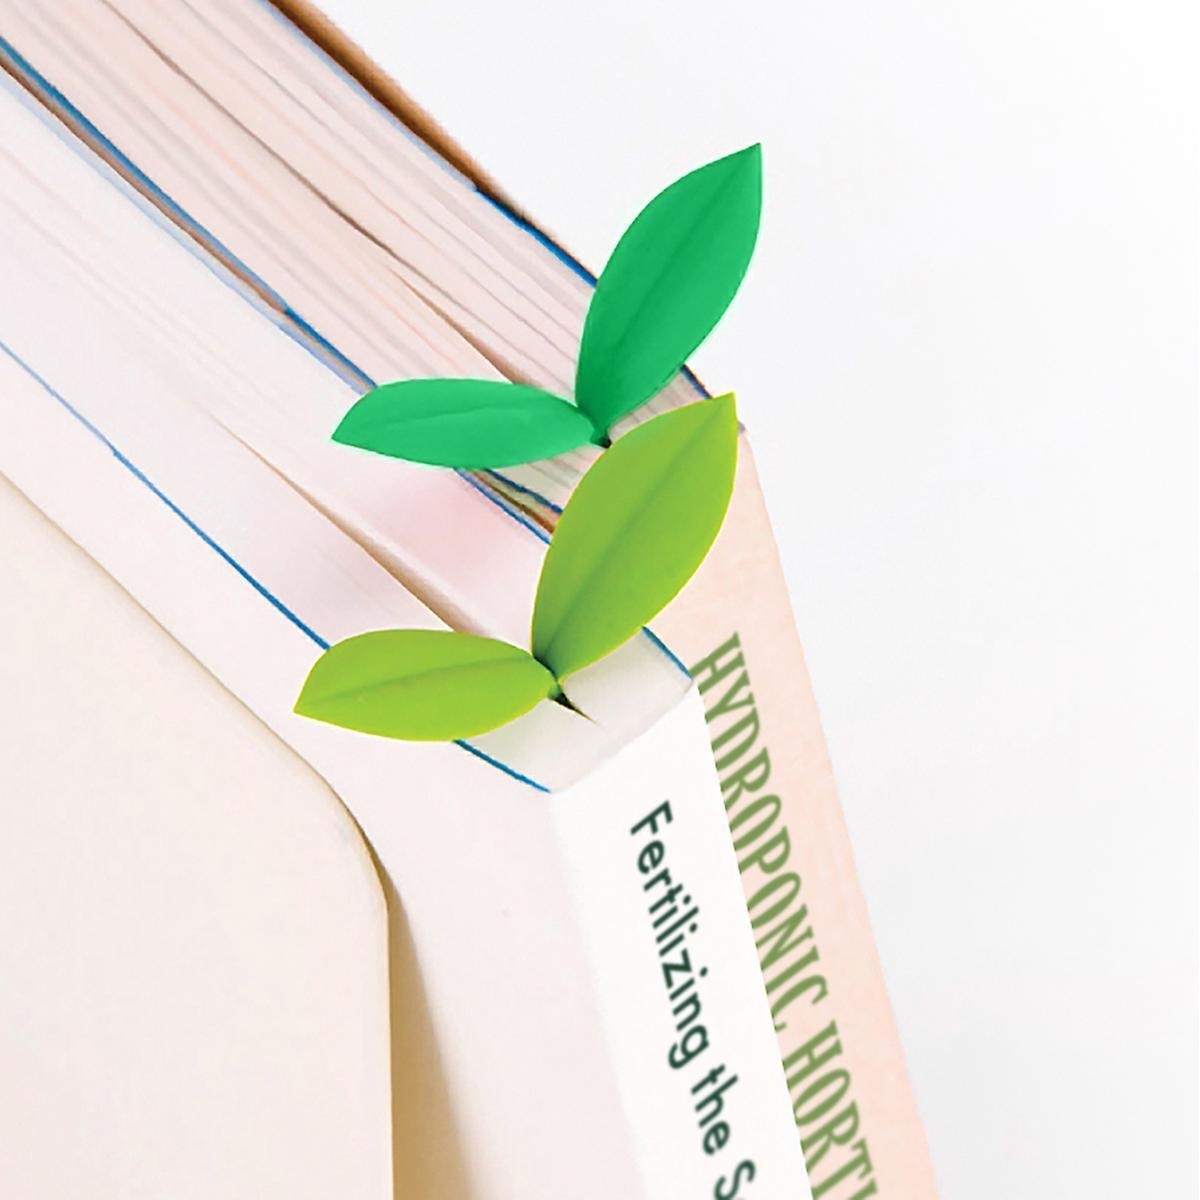 A green sprout-shaped bookmark nestled between the pages of a book